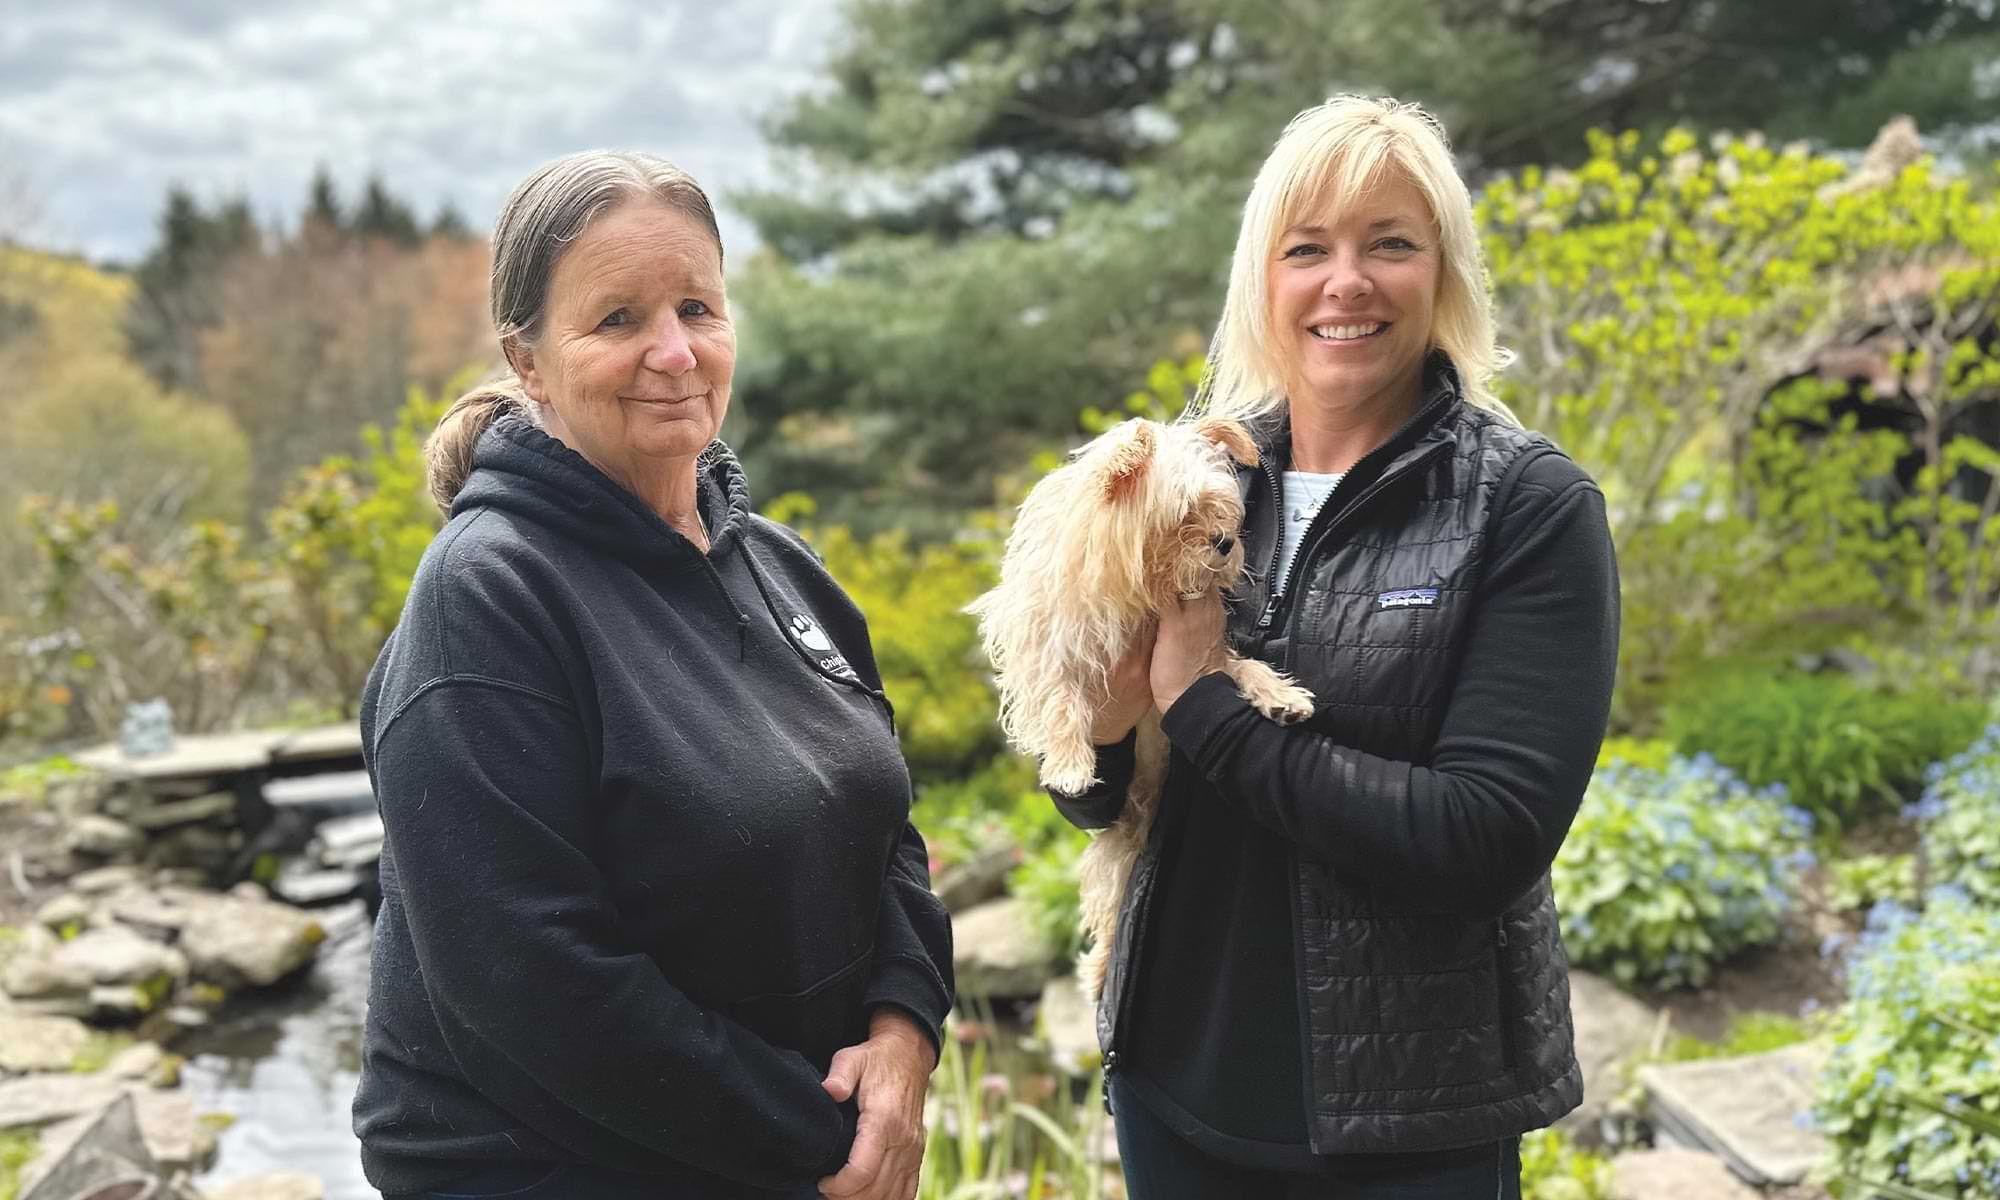 Marge Bart MBA ’85 smiles beside Cindy Charnetski ’97 who holds the rescue dog Mario, with the verdurous green of the Blue Chip Farm Animal Refuge in the background